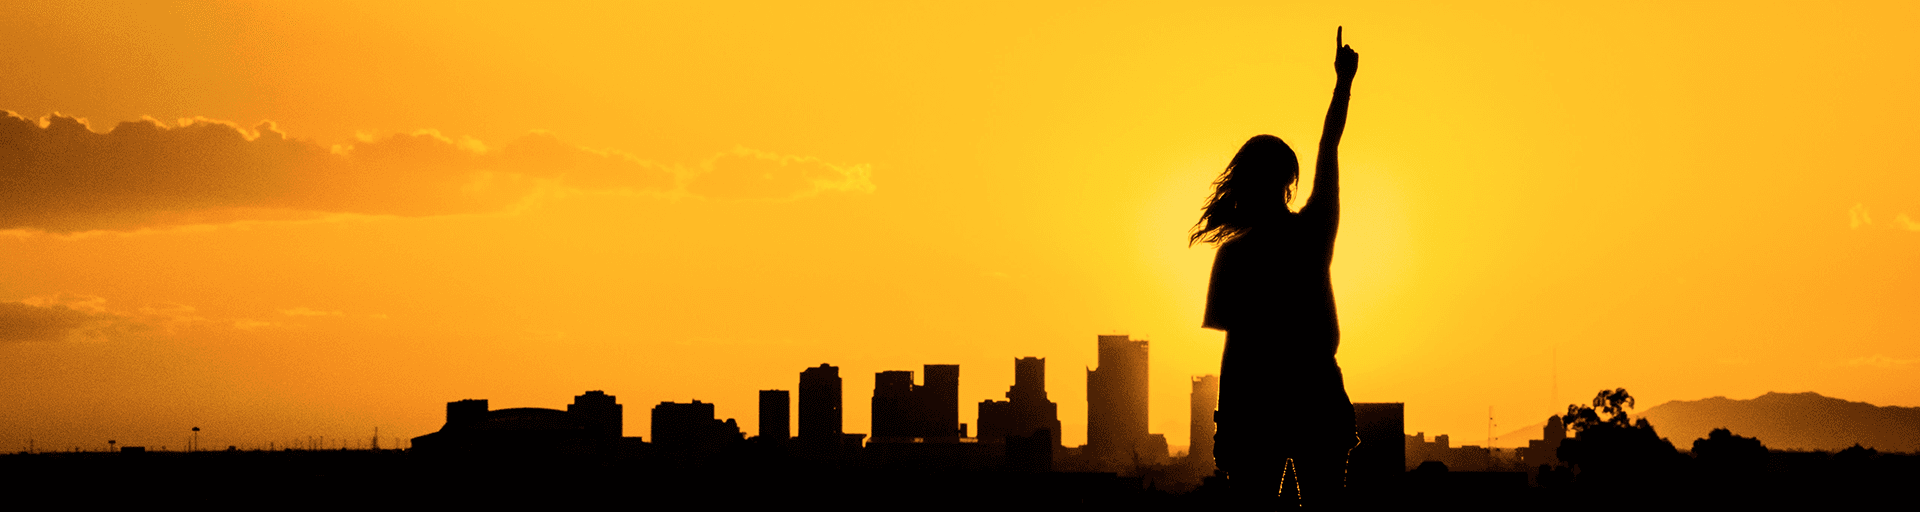 silhouette of a person pointing upward against a golden background with ASU buildings